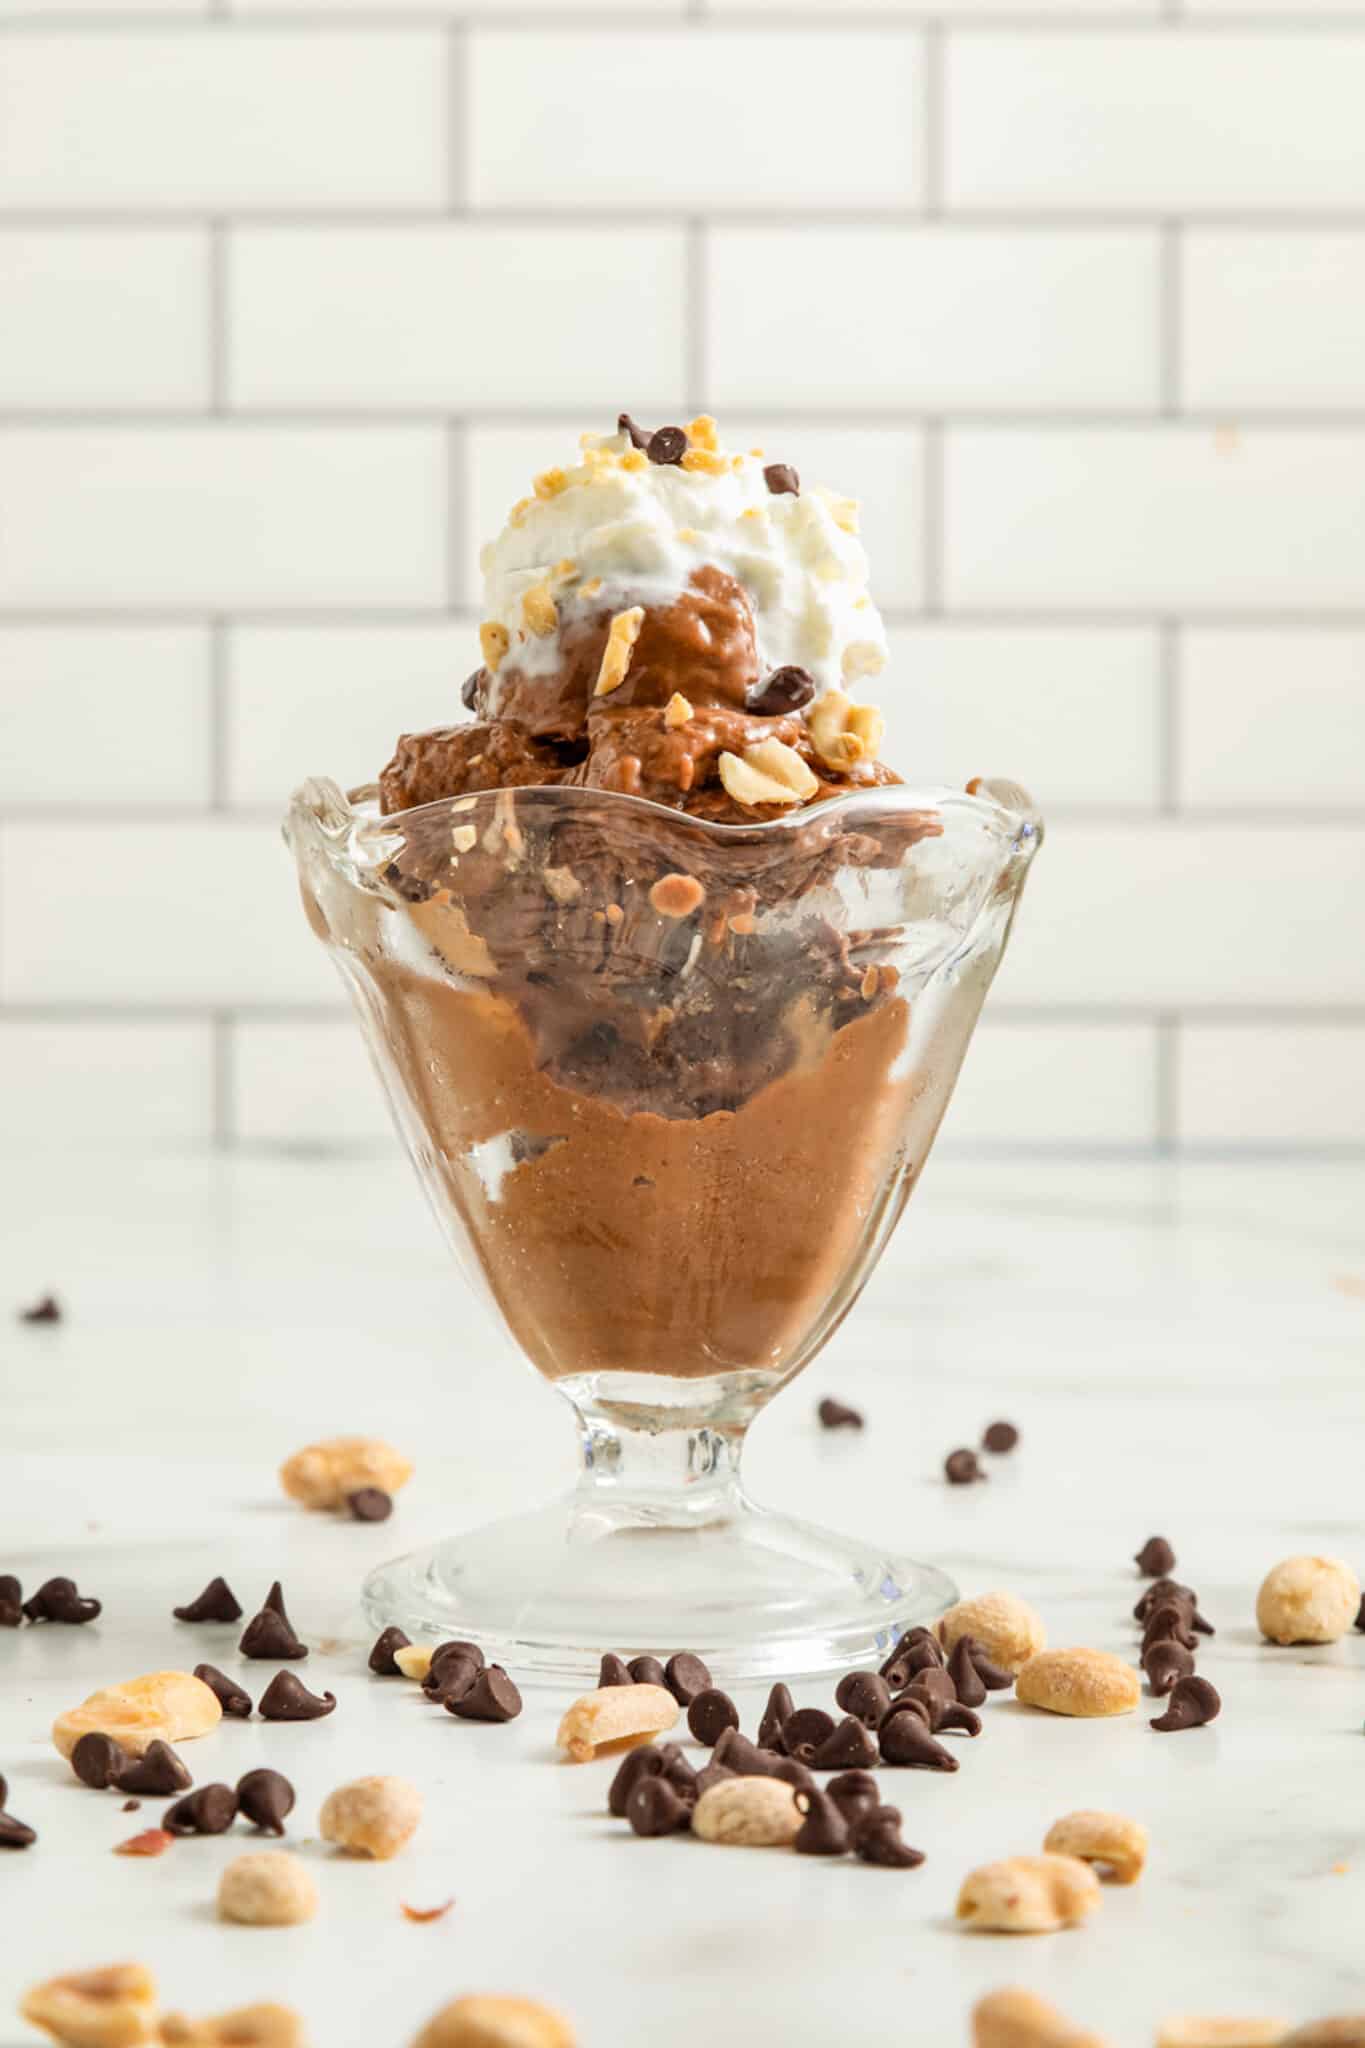 https://www.cleaneatingkitchen.com/wp-content/uploads/2022/06/Chocolate-Peanut-Butter-Banana-Ice-Cream-front-view-scaled.jpg